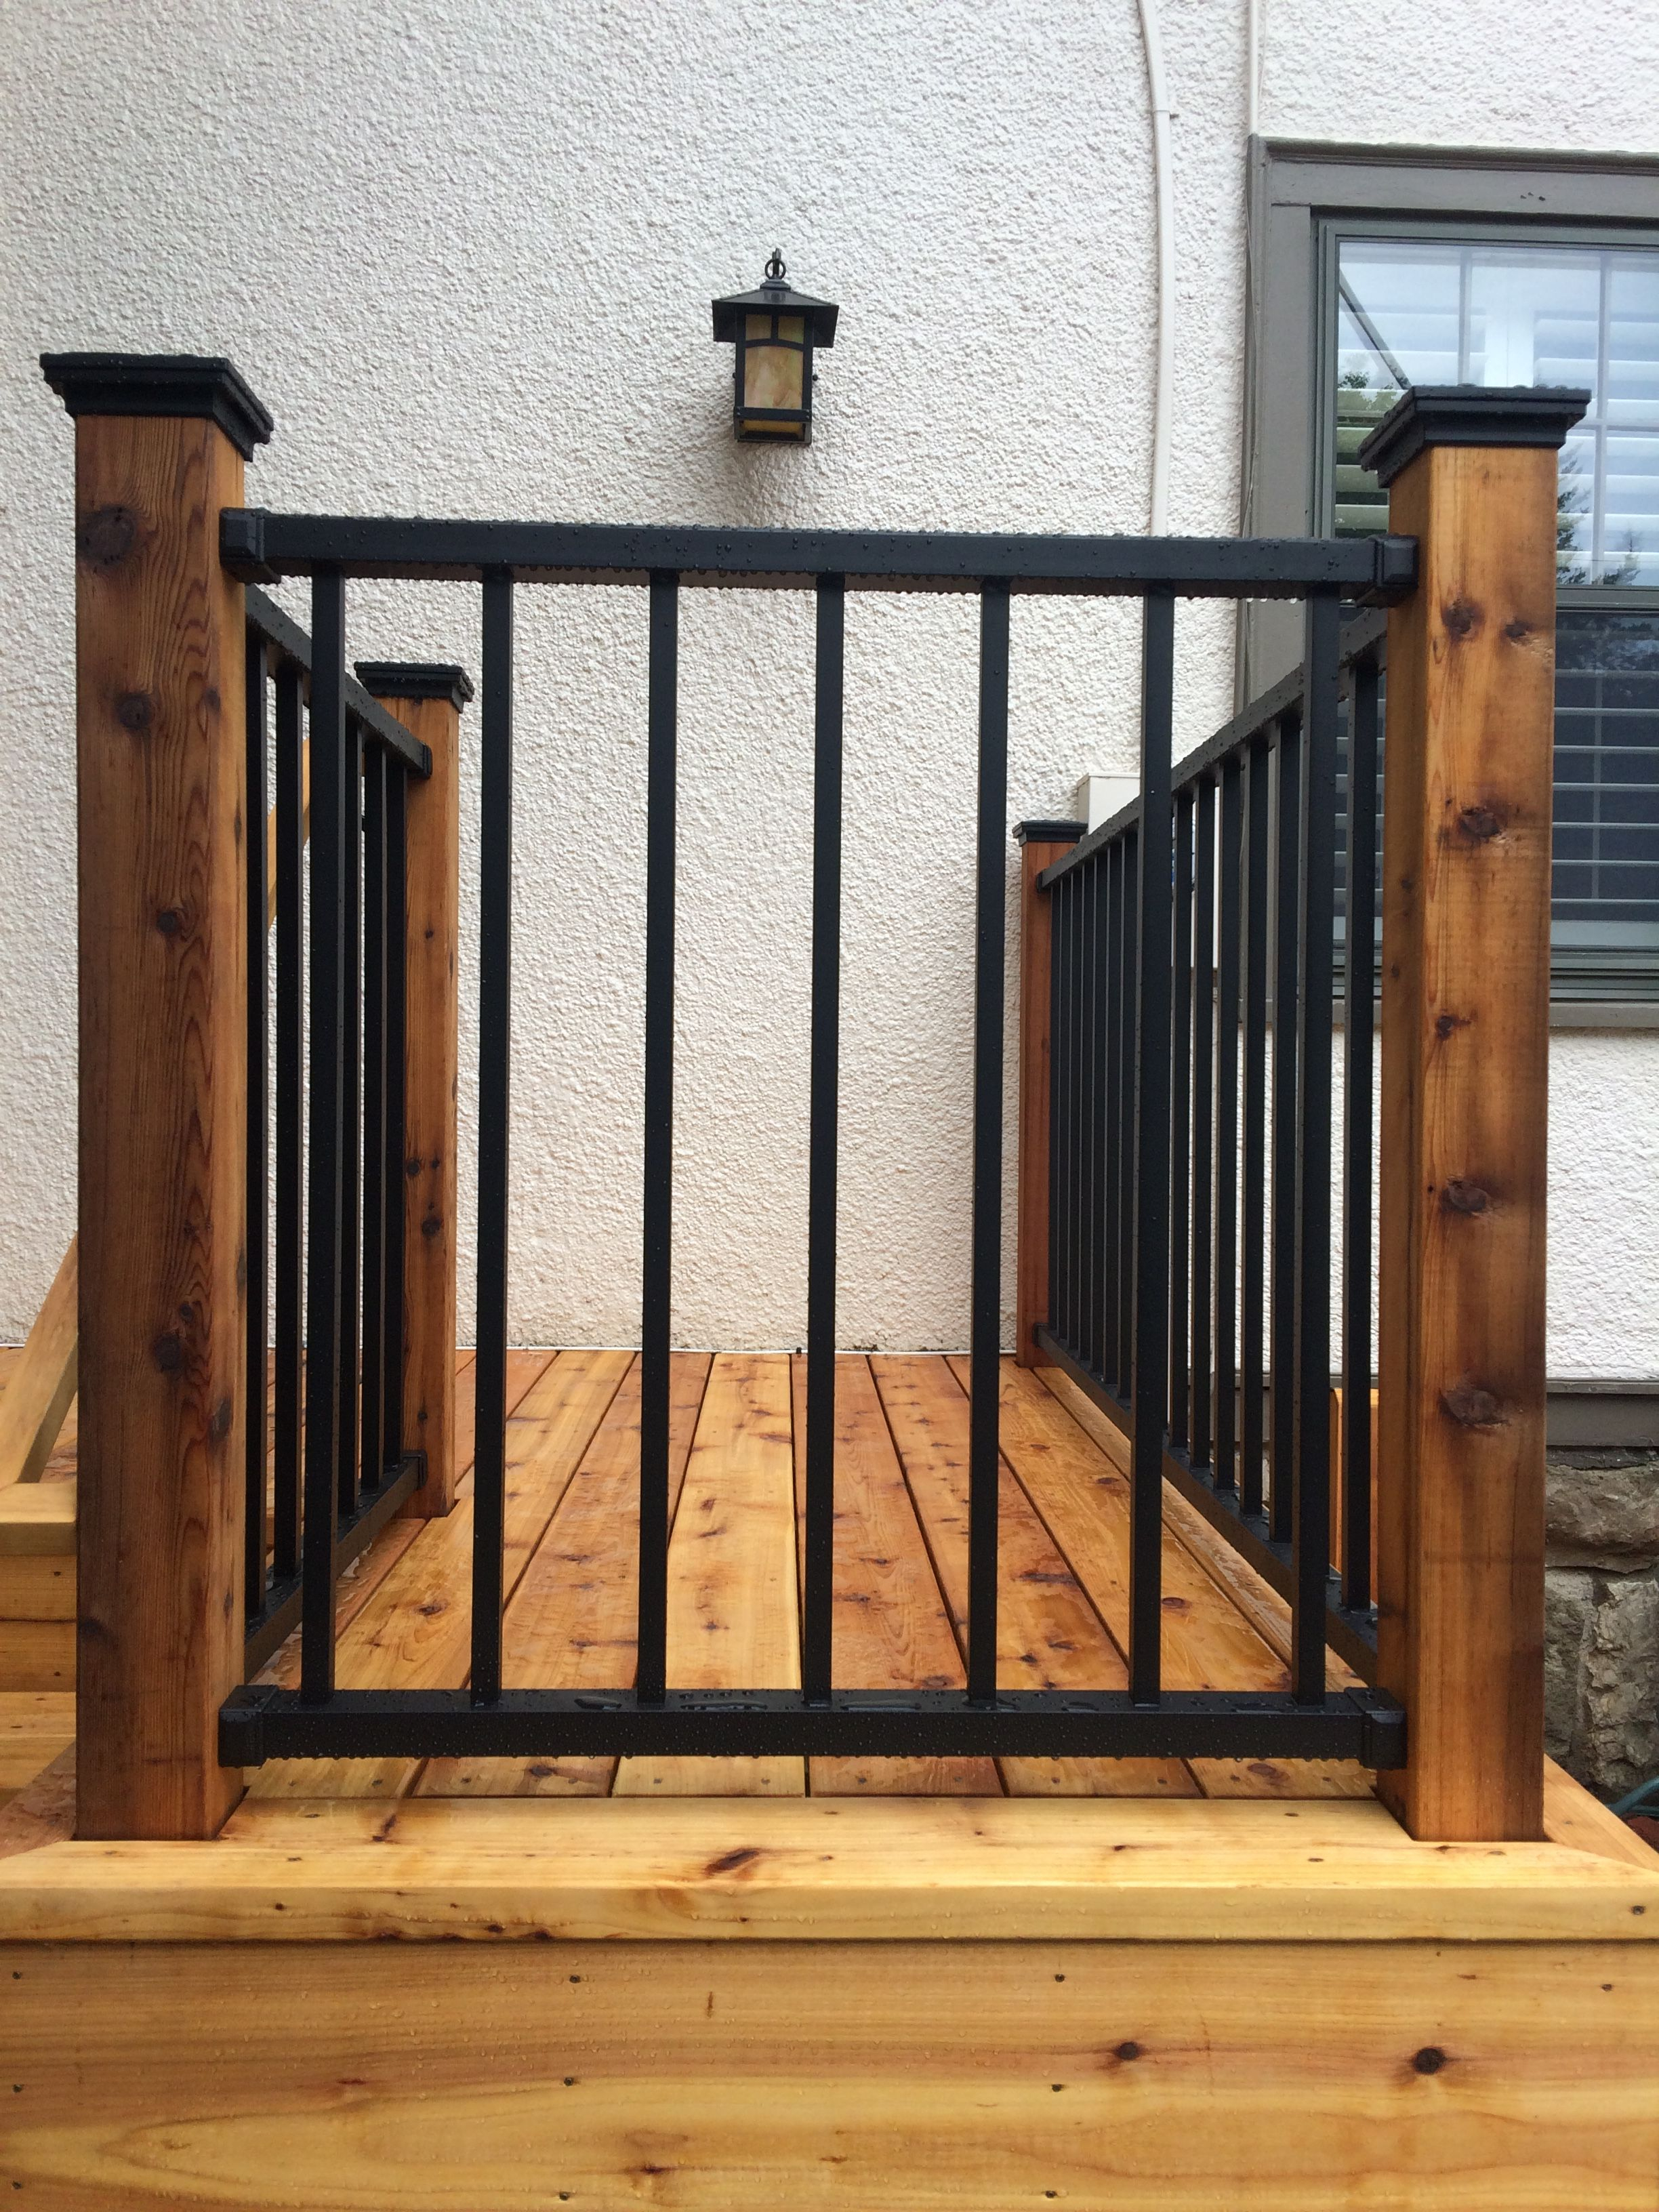 Westbury Aluminum Railing Black Attached To Cedar Posts Railings intended for sizing 2448 X 3264